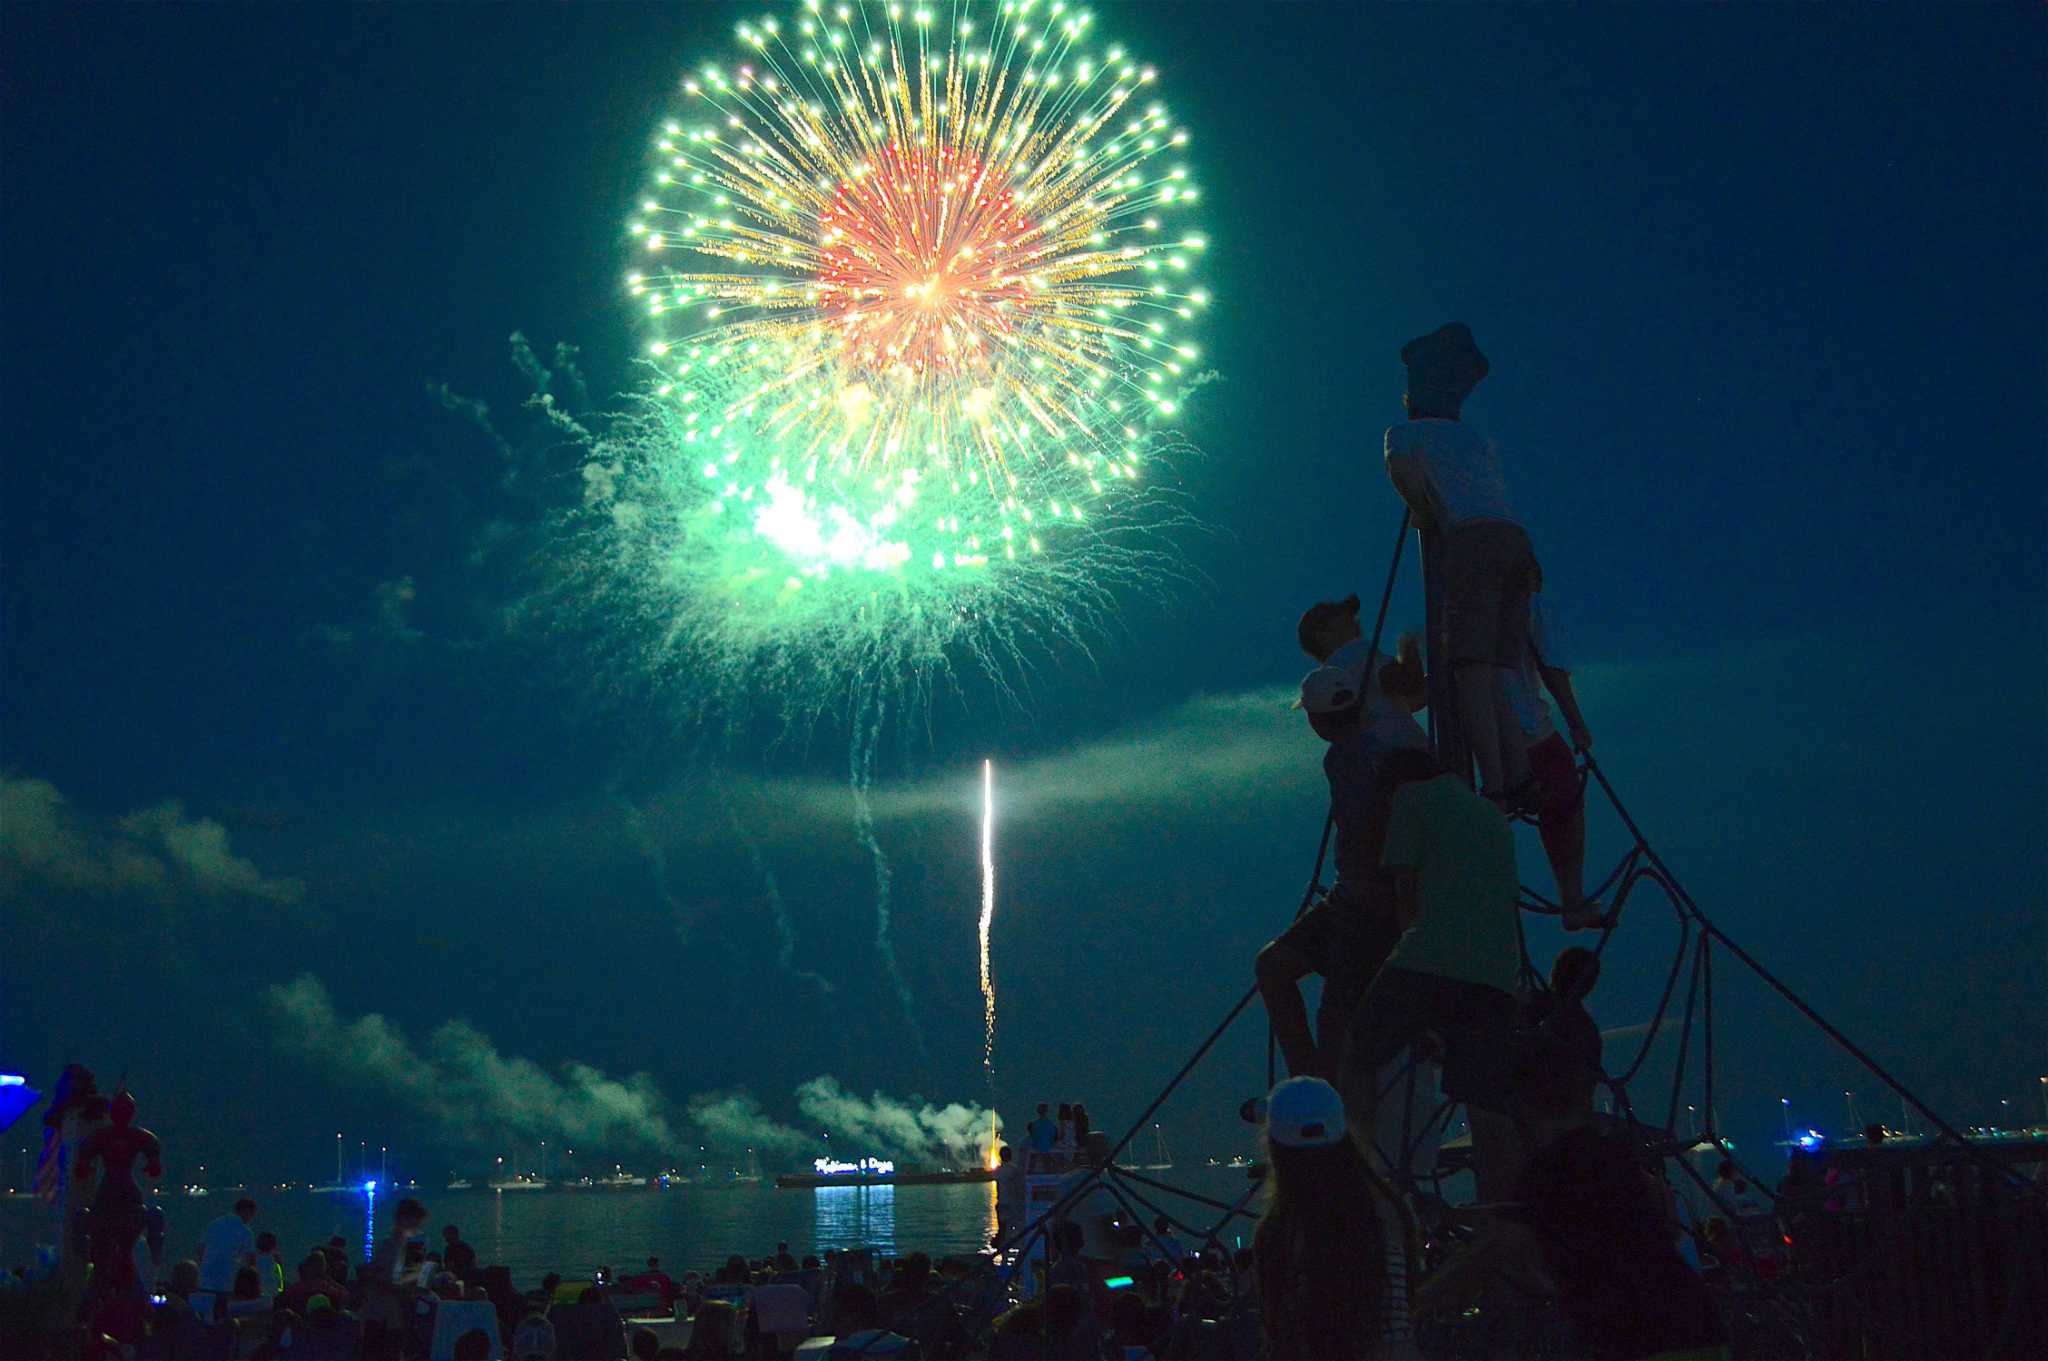 Guide to Westport’s 2019 Fourth of July fireworks